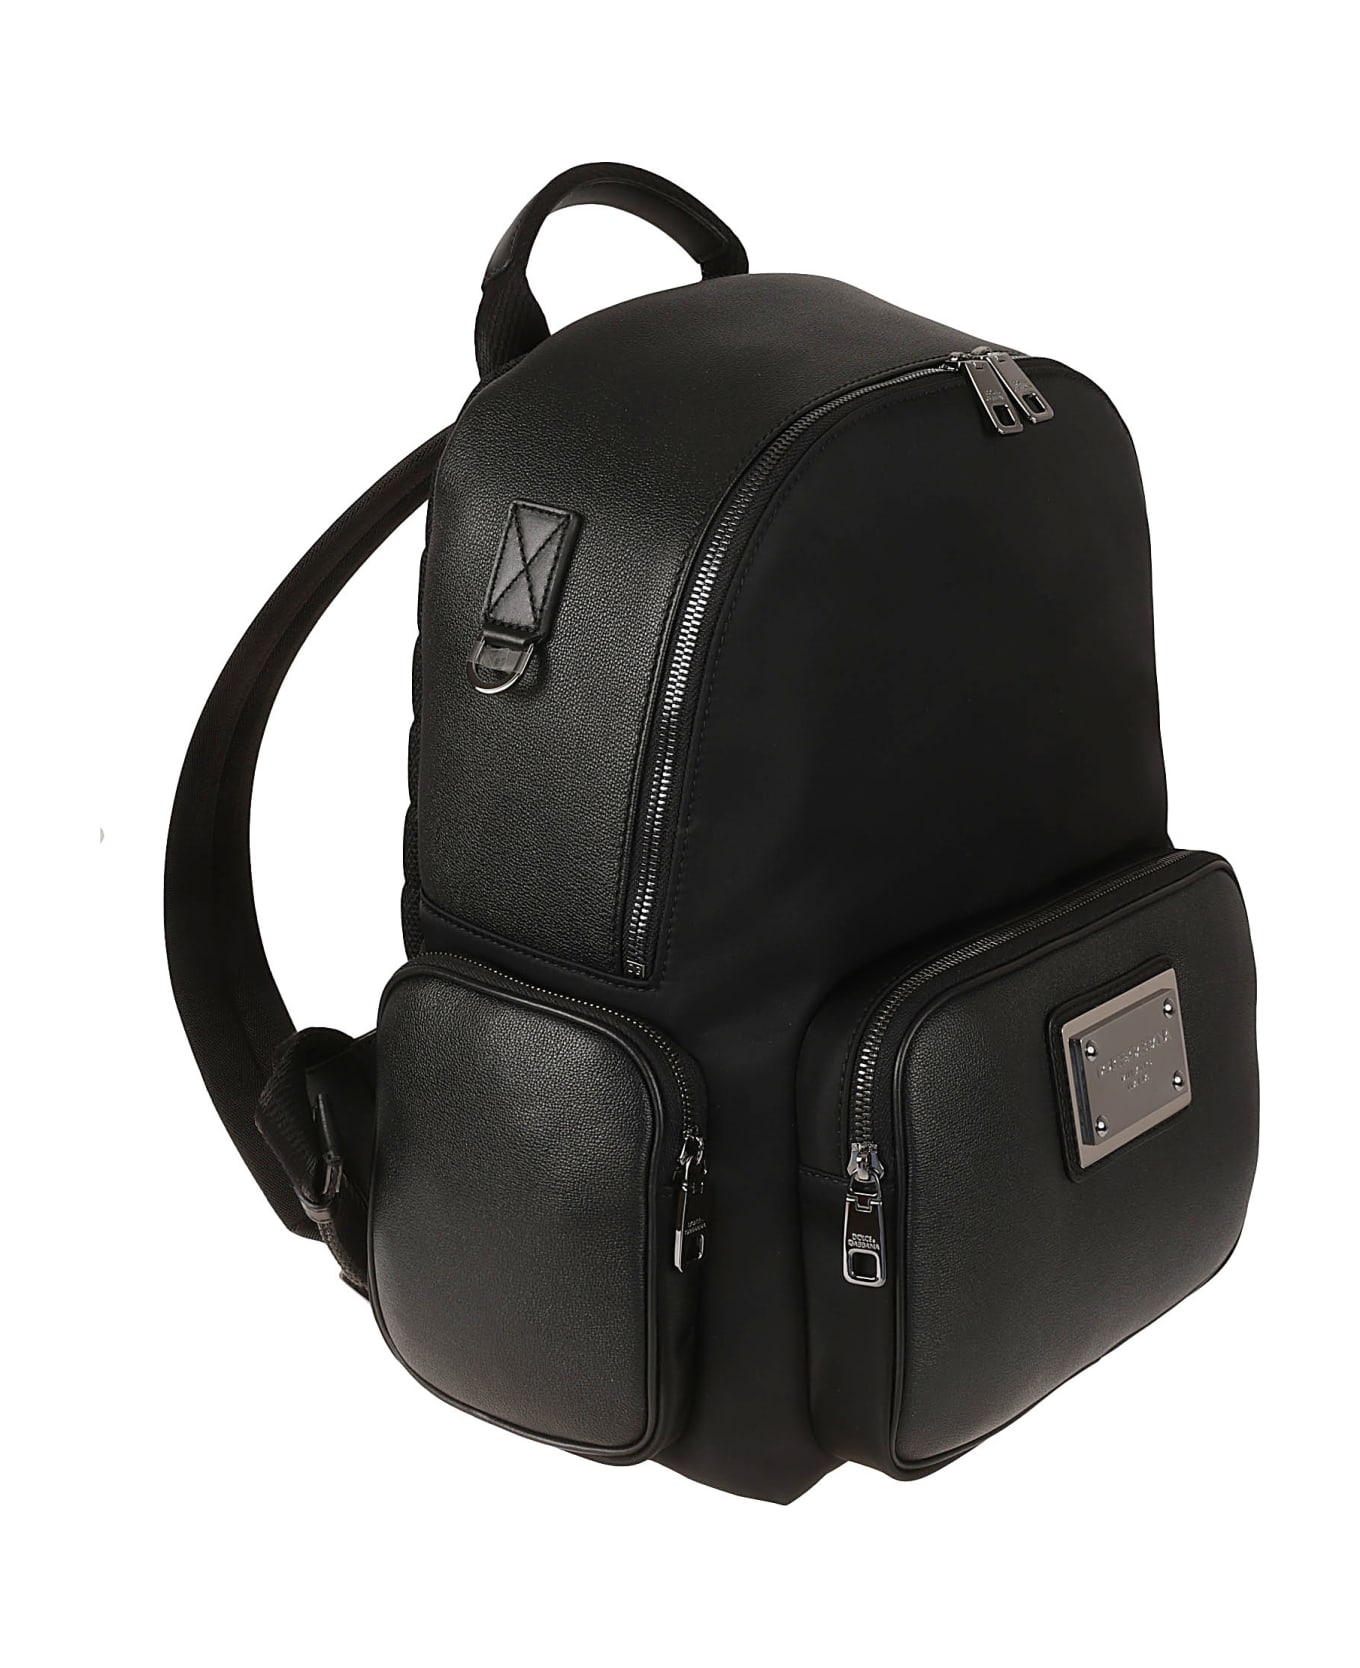 Dolce & Gabbana Backpack In Grained Calfskin And Nylon - Nero バックパック